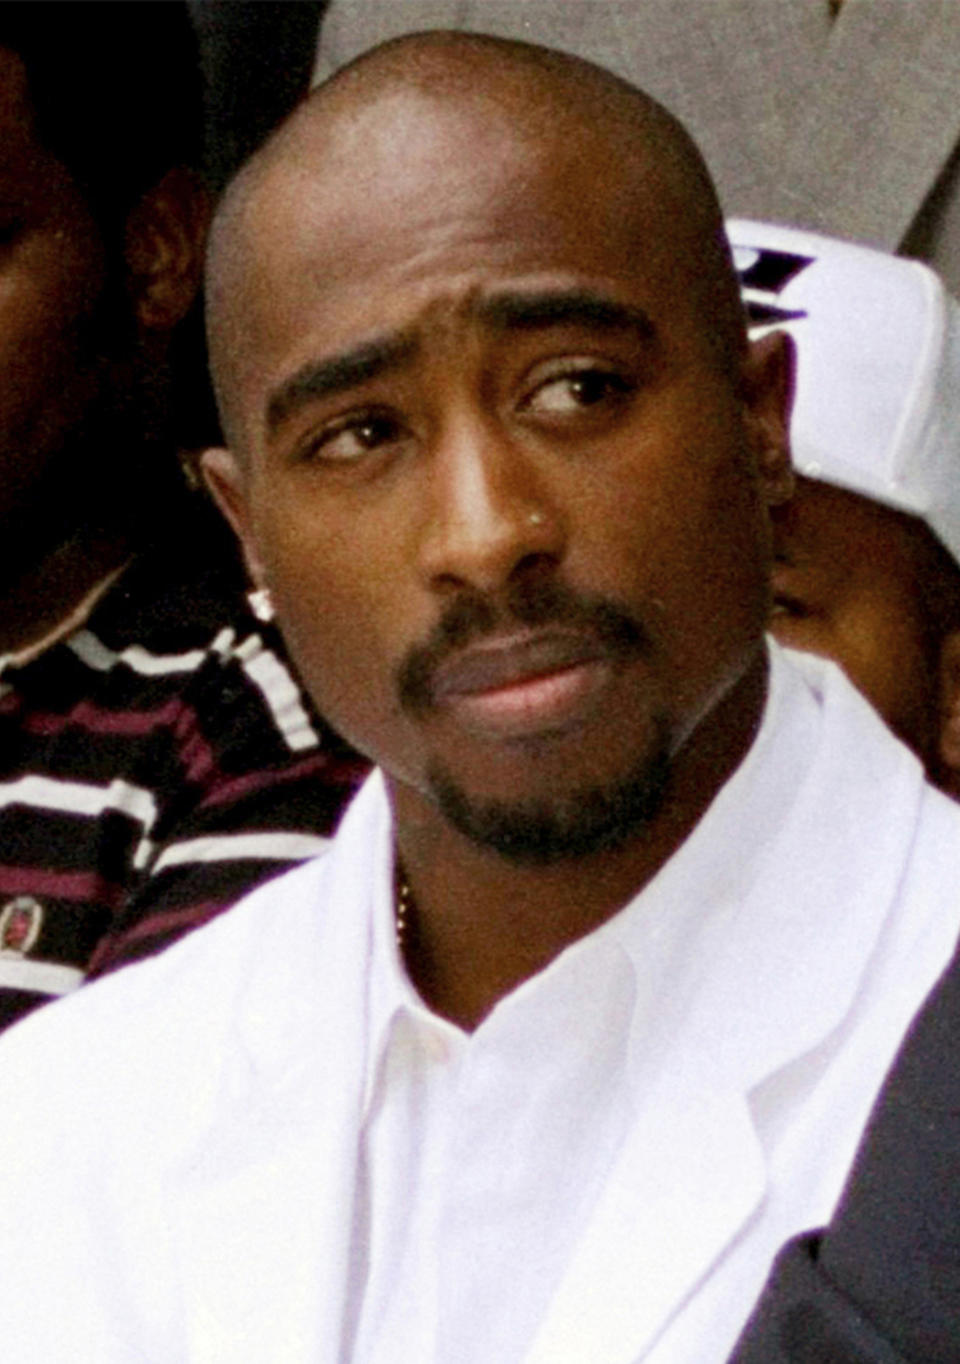 FILE - Rapper Tupac Shakur attends a voter registration event in South Central Los Angeles, Aug. 15, 1996. A former Los Angeles-area gang leader jailed in Las Vegas in the killing of hip-hop music icon Tupac Shakur in 1996 has hired a private attorney to represent him ahead of his murder trial scheduled this summer. Duane “Keffe D” Davis dismissed court-appointed lawyers and hired criminal defense attorney Carl Arnold, according to a court filing posted Thursday, Jan. 18, 2024. (AP Photo/Frank Wiese, File)